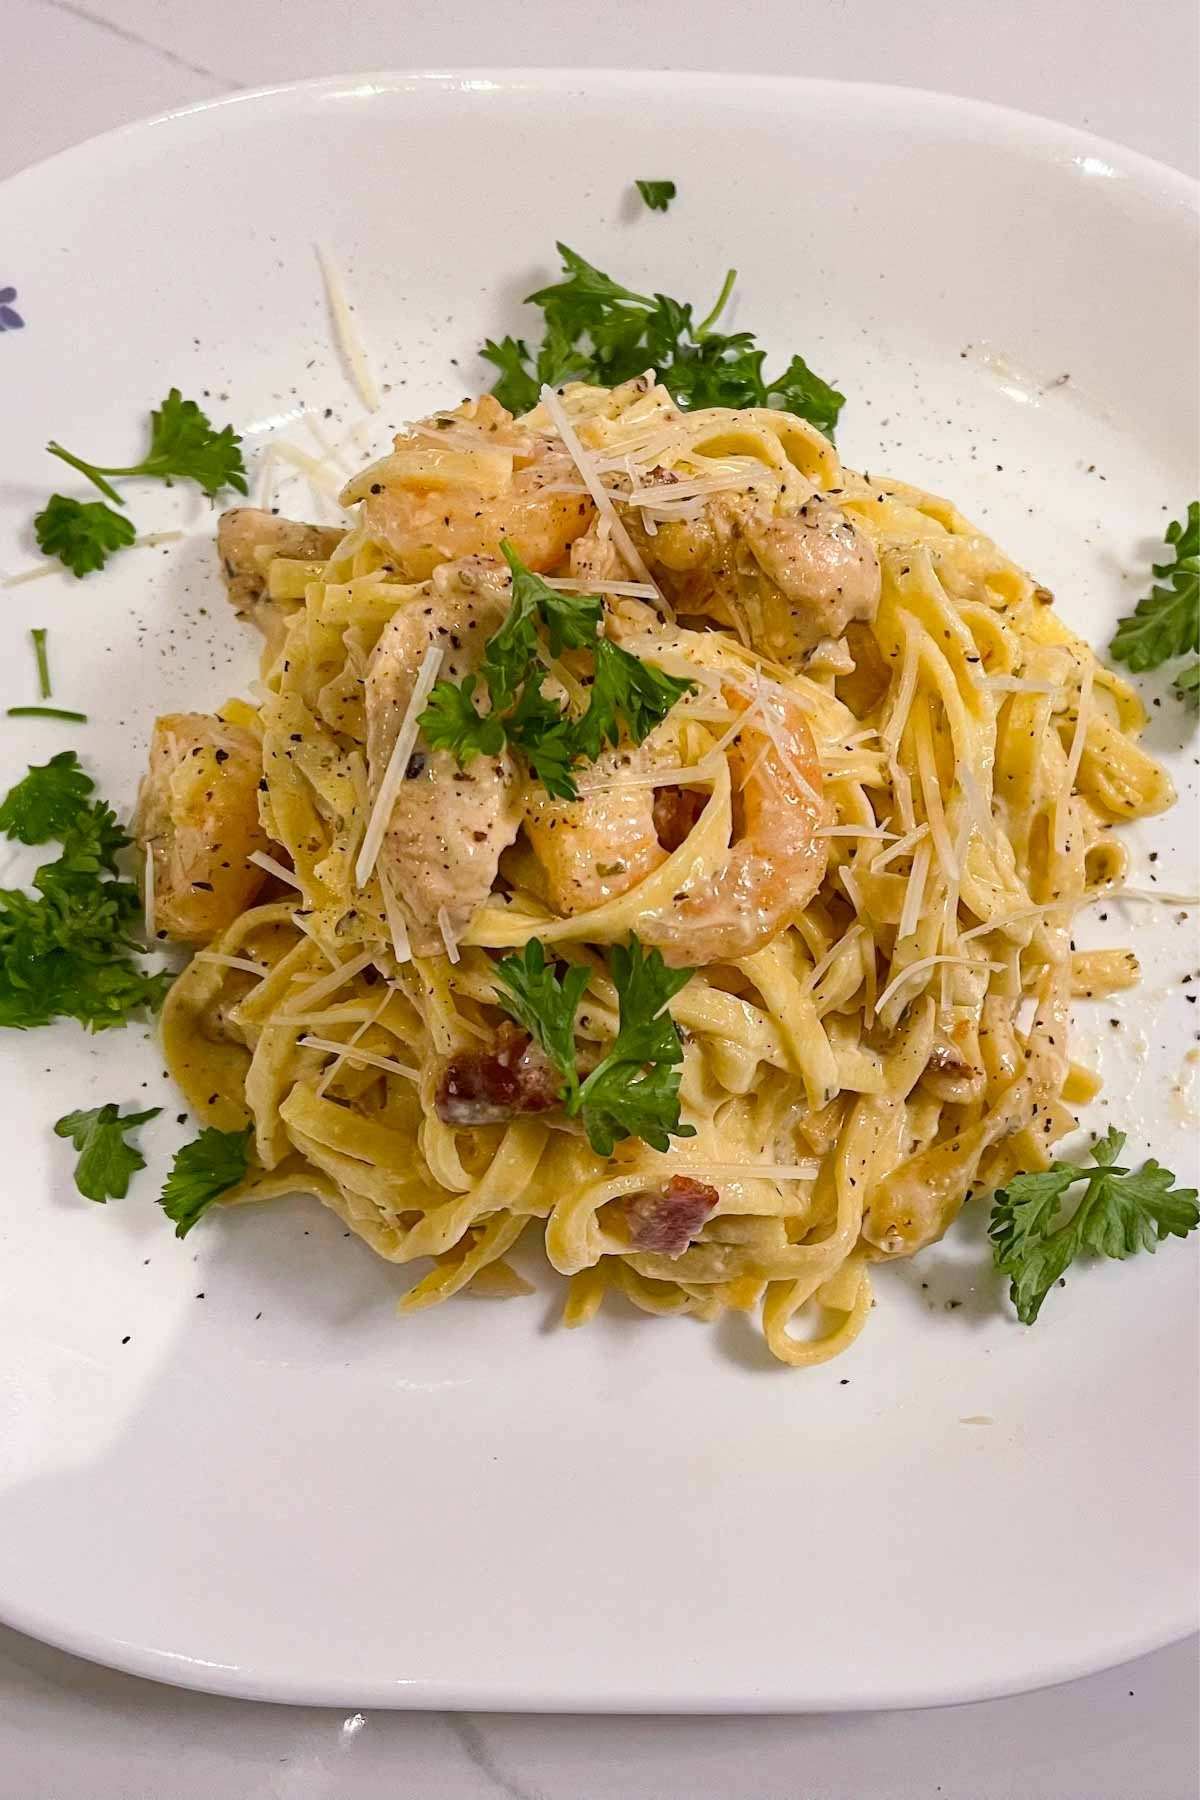 Tired of boring mid-week lunches? Kick it up a notch with this tasty Chicken and Shrimp Carbonara, just like they do at Olive Garden! Made with fresh, flavorful ingredients and seasoned with herbs, this is a meal the whole family will enjoy.